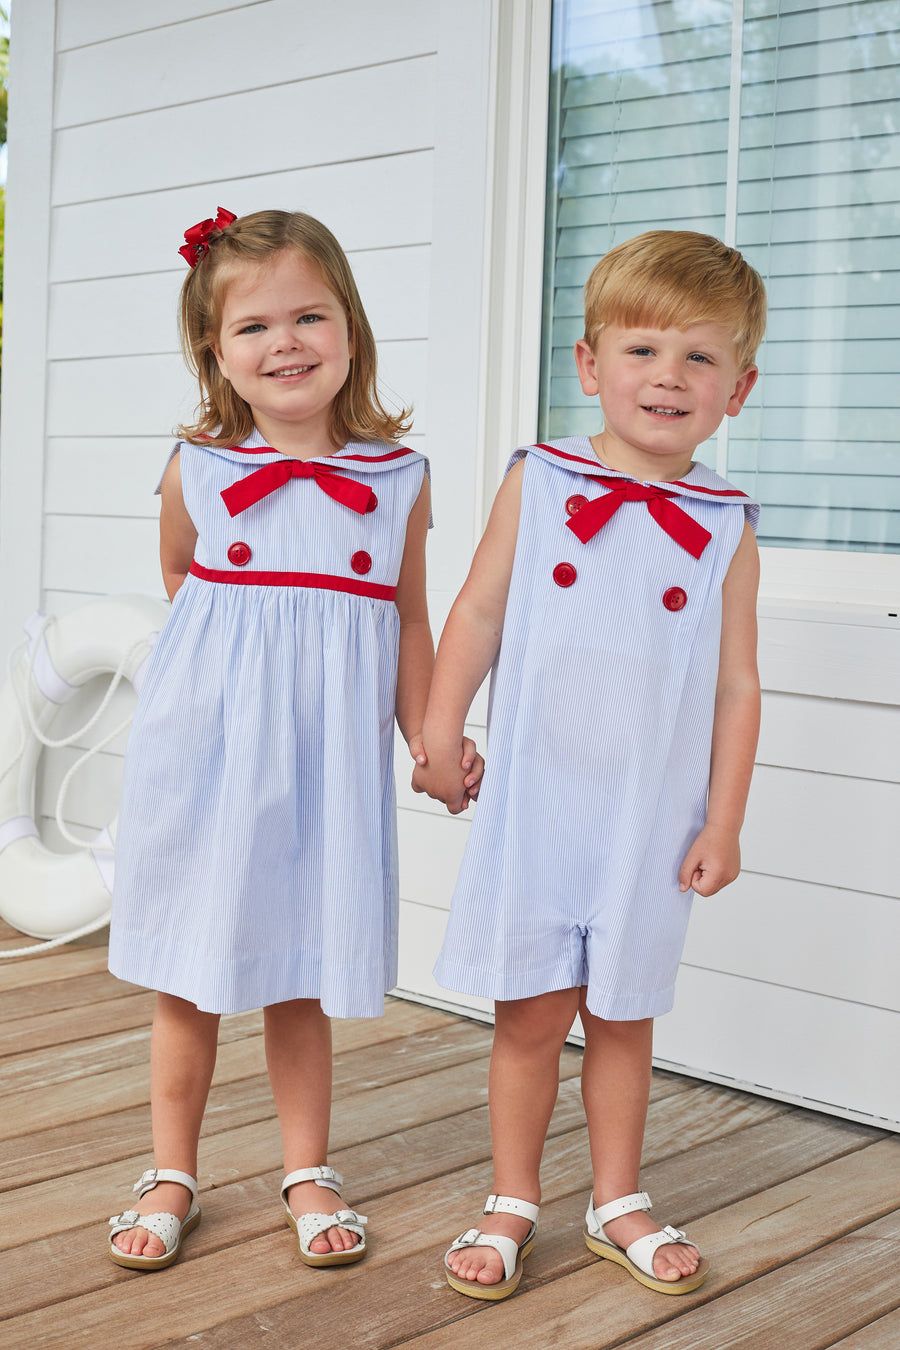 Little English traditional children's clothing, girl's classic thin light blue stripe dress with sailor collar, fixed neck tie, and red button detail for Summer